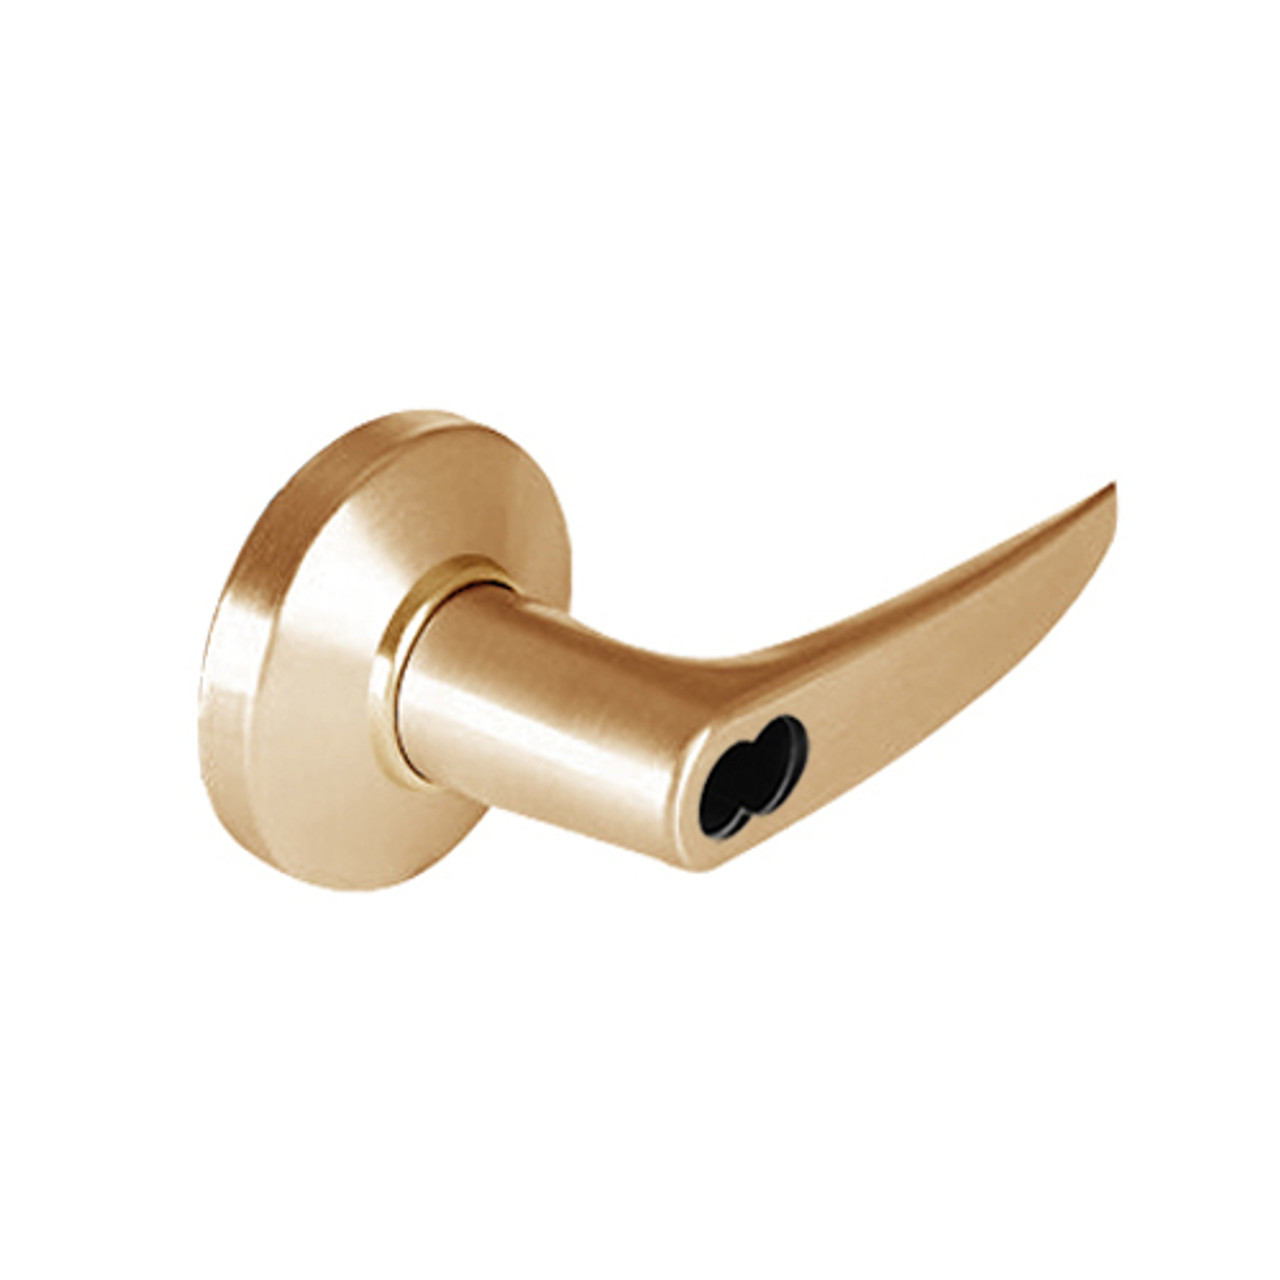 9K37YR16CSTK612 Best 9K Series Special Function Cylindrical Lever Locks with Curved without Return Lever Design Accept 7 Pin Best Core in Satin Bronze